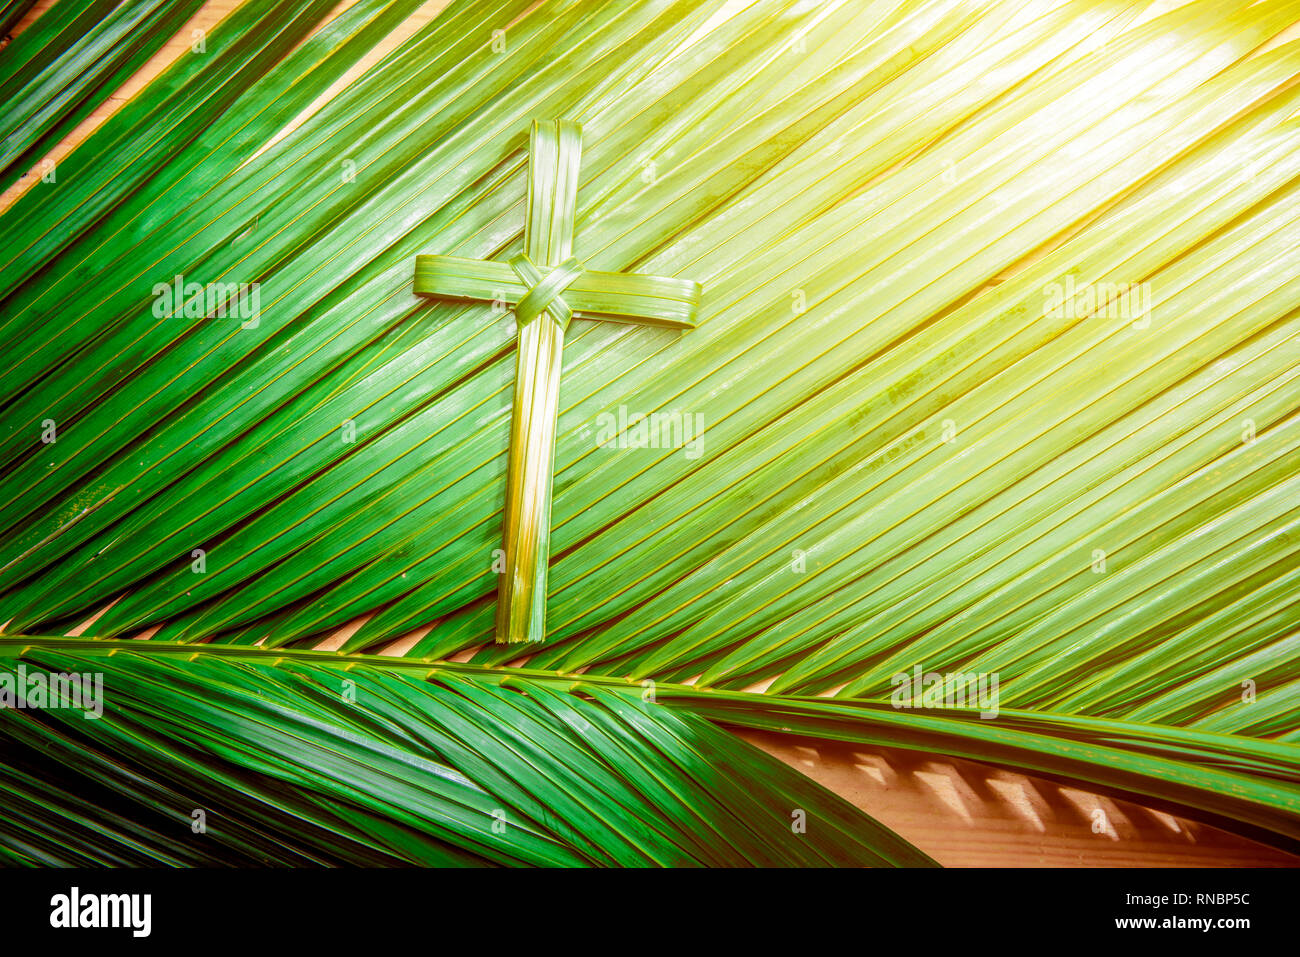 Cross Shape Of Palm Leaf On Palm Branches With Ray In Wooden Background